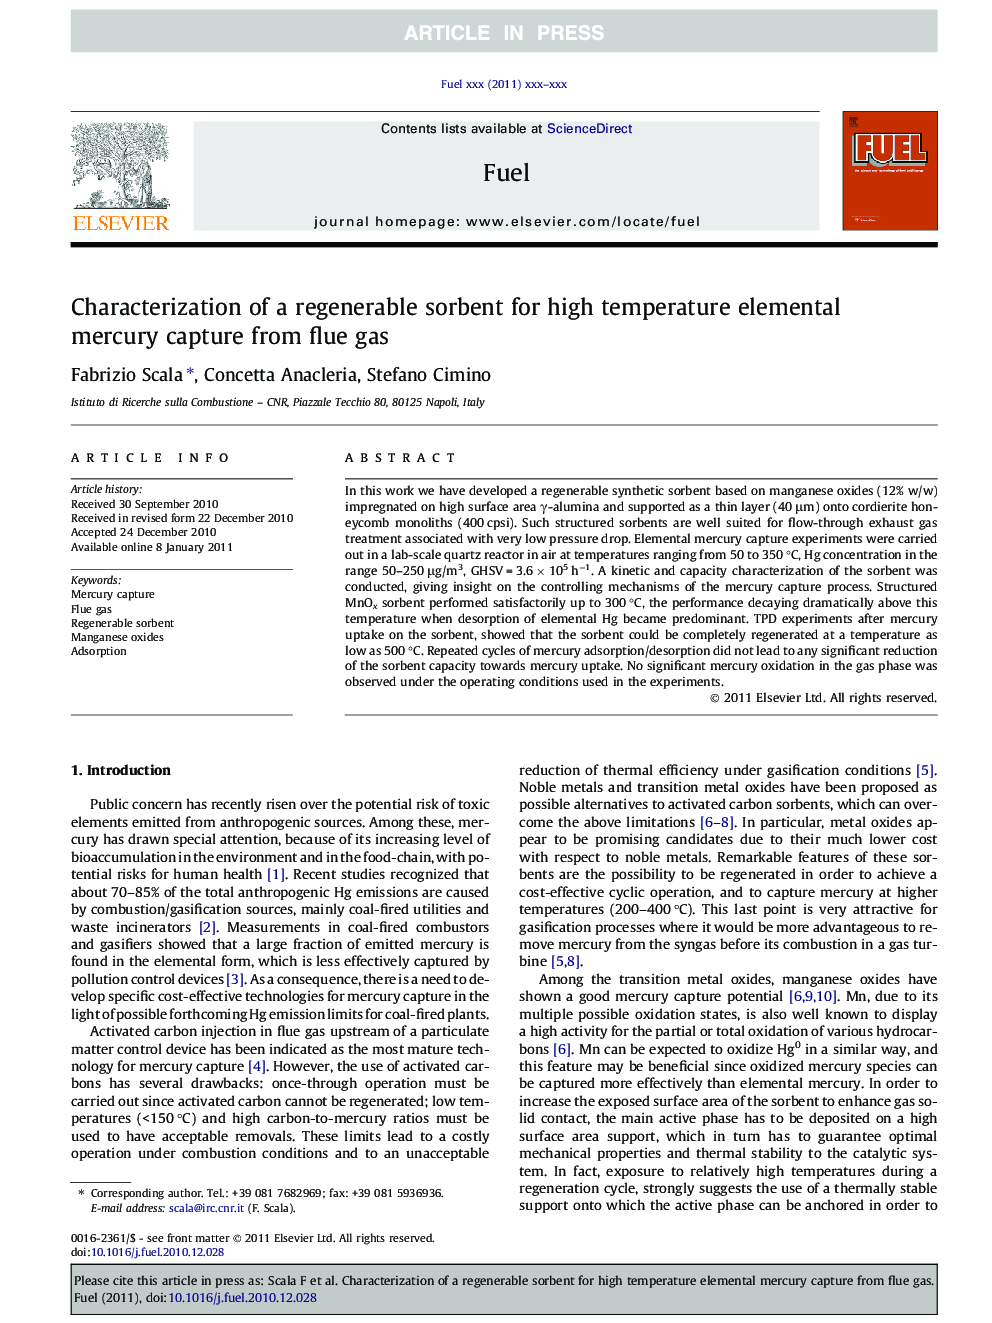 Characterization of a regenerable sorbent for high temperature elemental mercury capture from flue gas